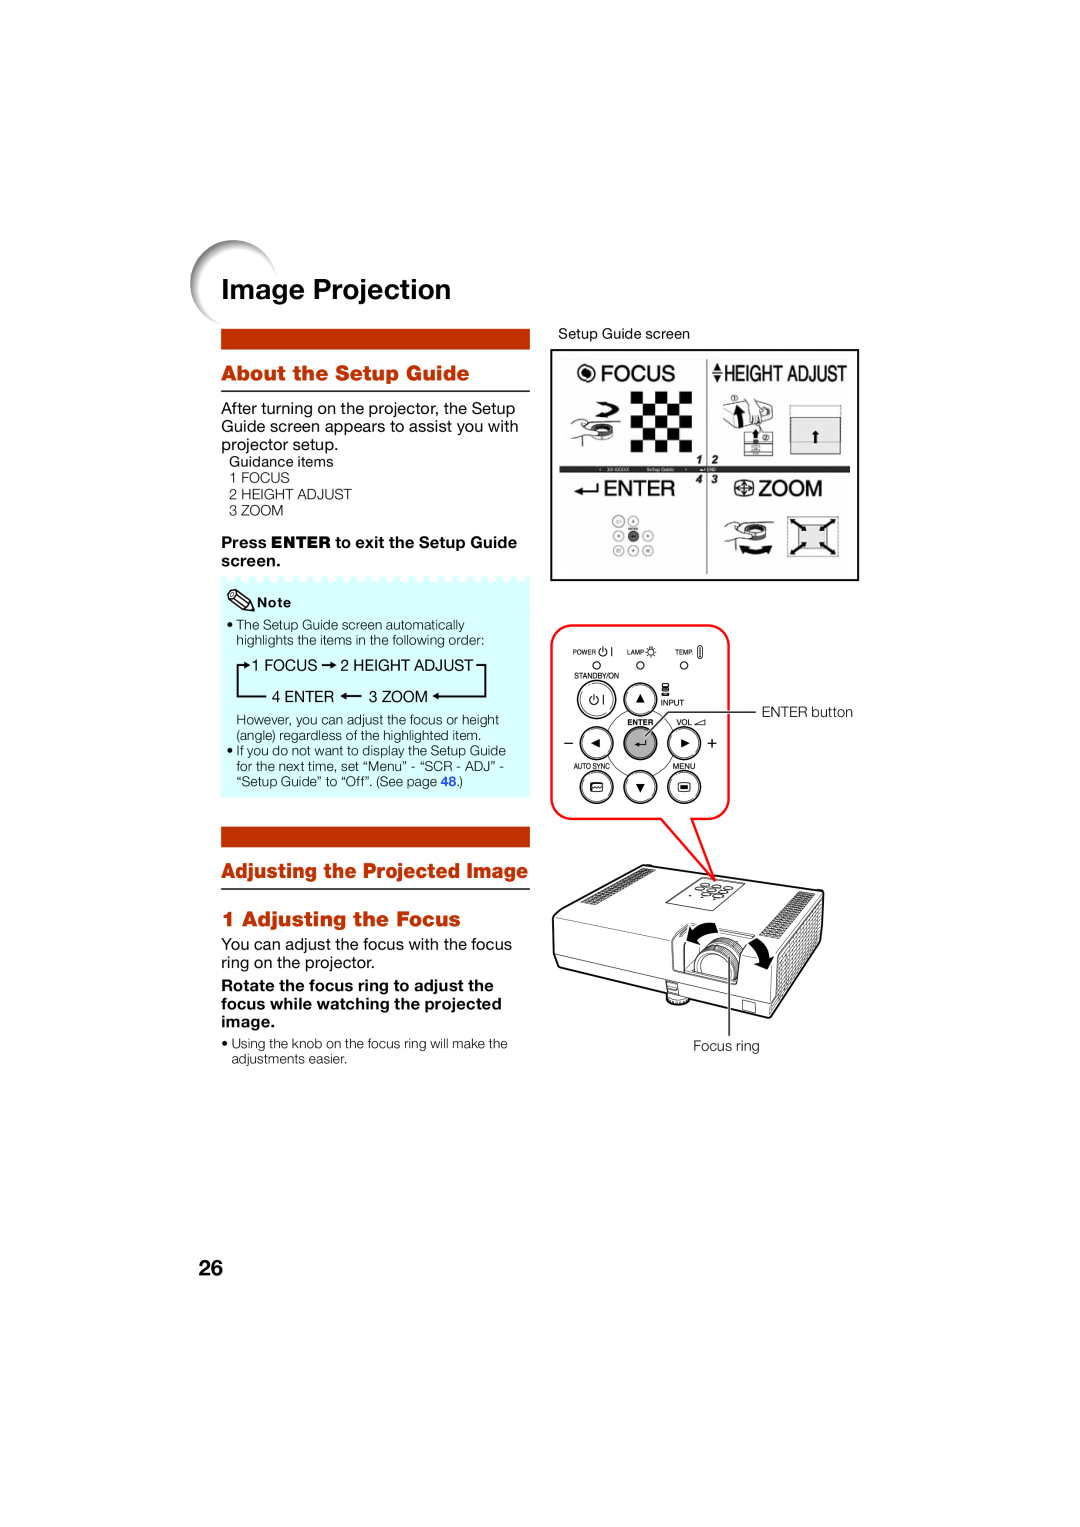 Sharp XR-55X Image Projection, About the Setup Guide, Adjusting the Projected Image 1 Adjusting the Focus, Enter, Zoom 